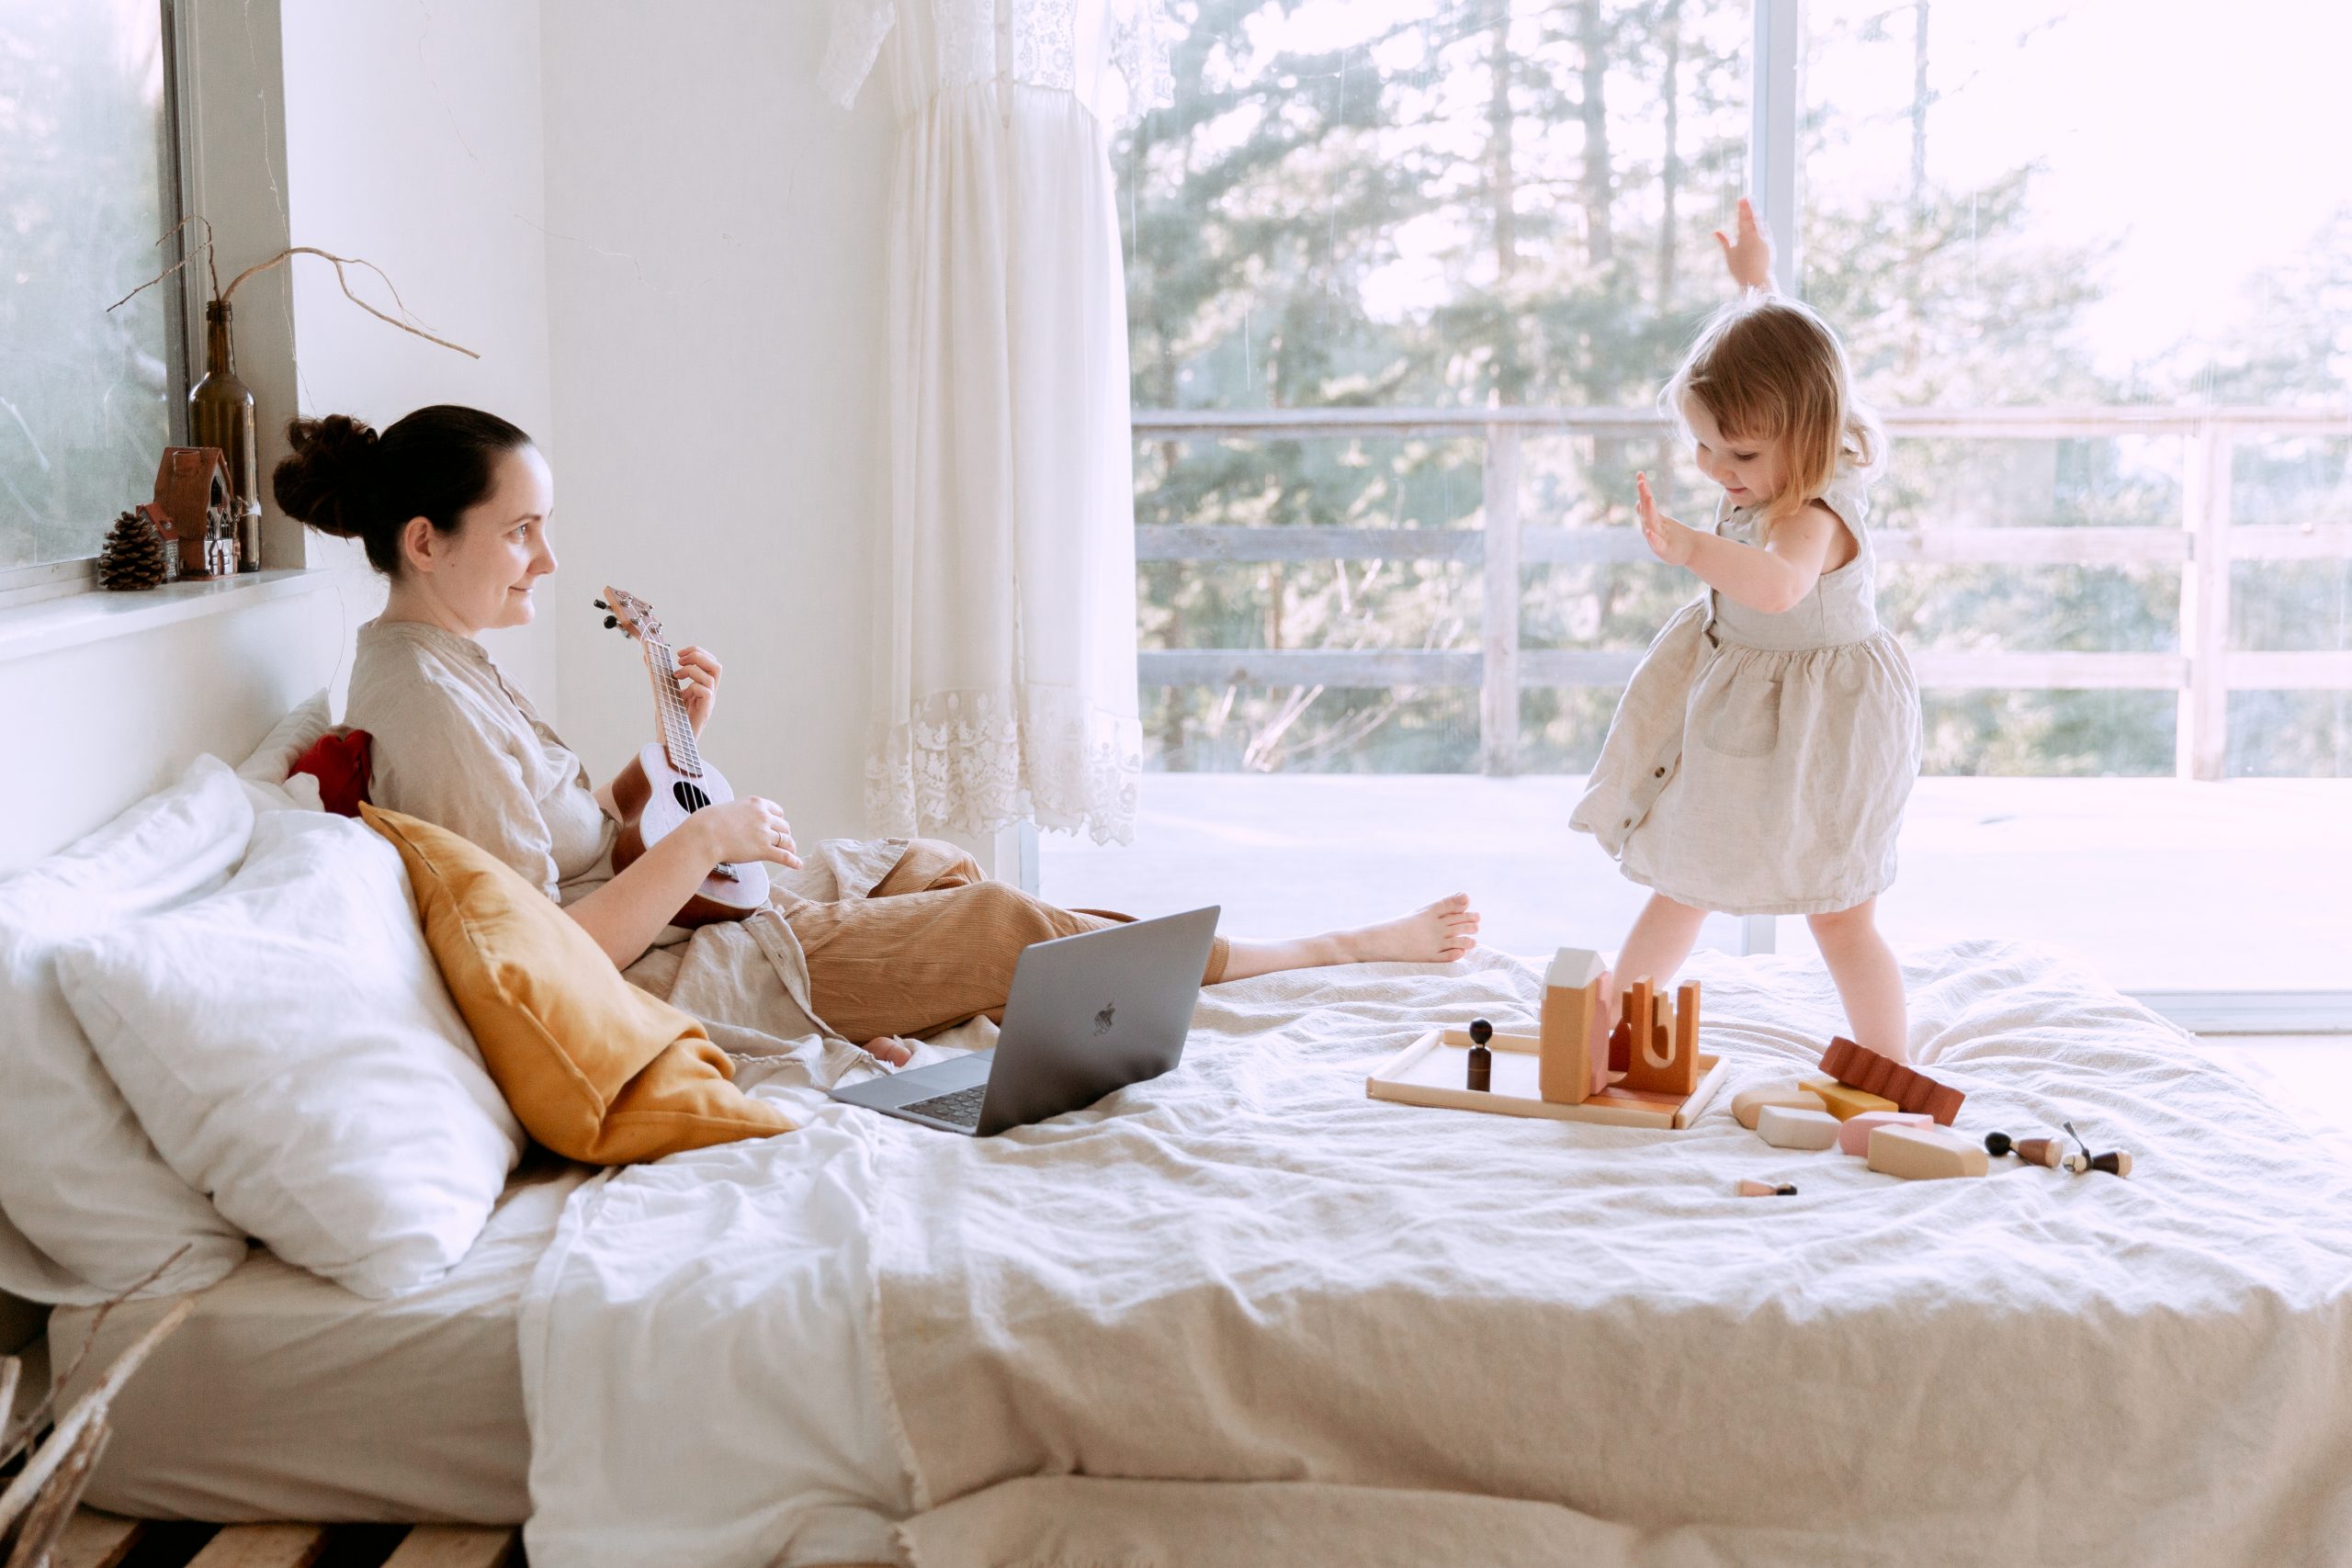 Mom Playing Ukulele While Little Girl Dances On The Bed, Learn How To Bring Music Lessons To Your Homeschool For Free